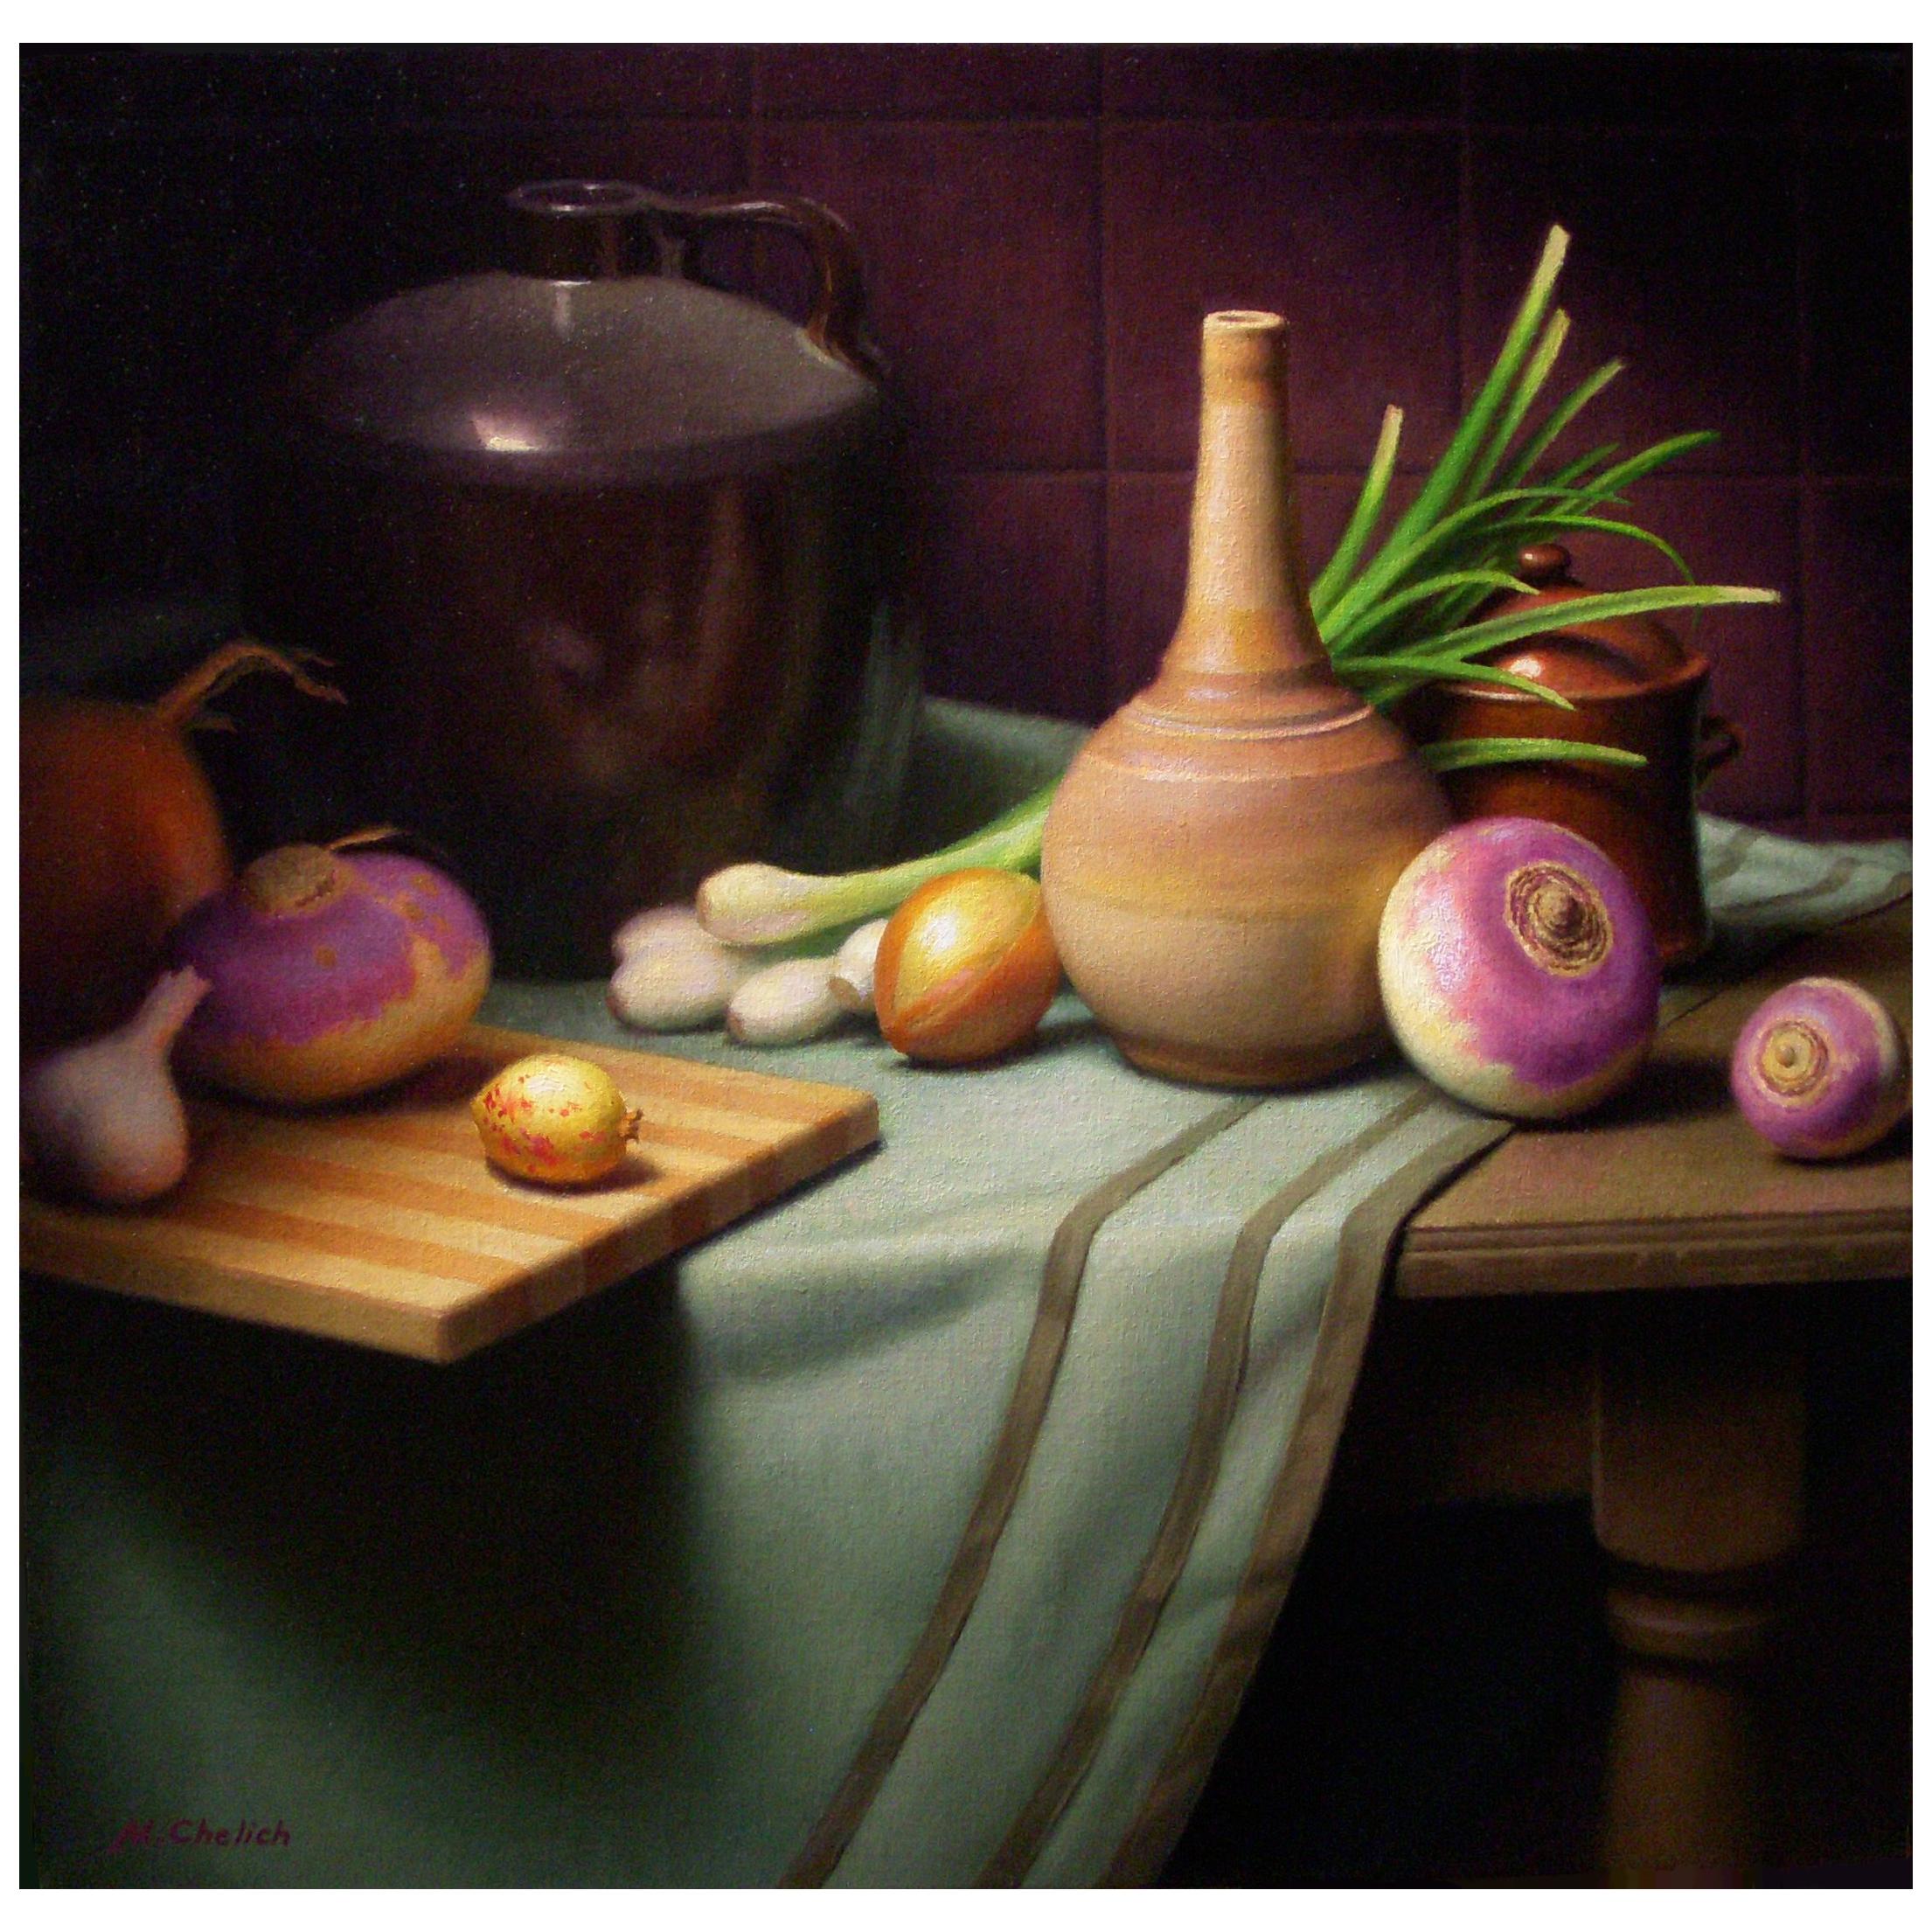 Still Life with Turnips, Original Oil Painting on Canvas by Michael Chelich